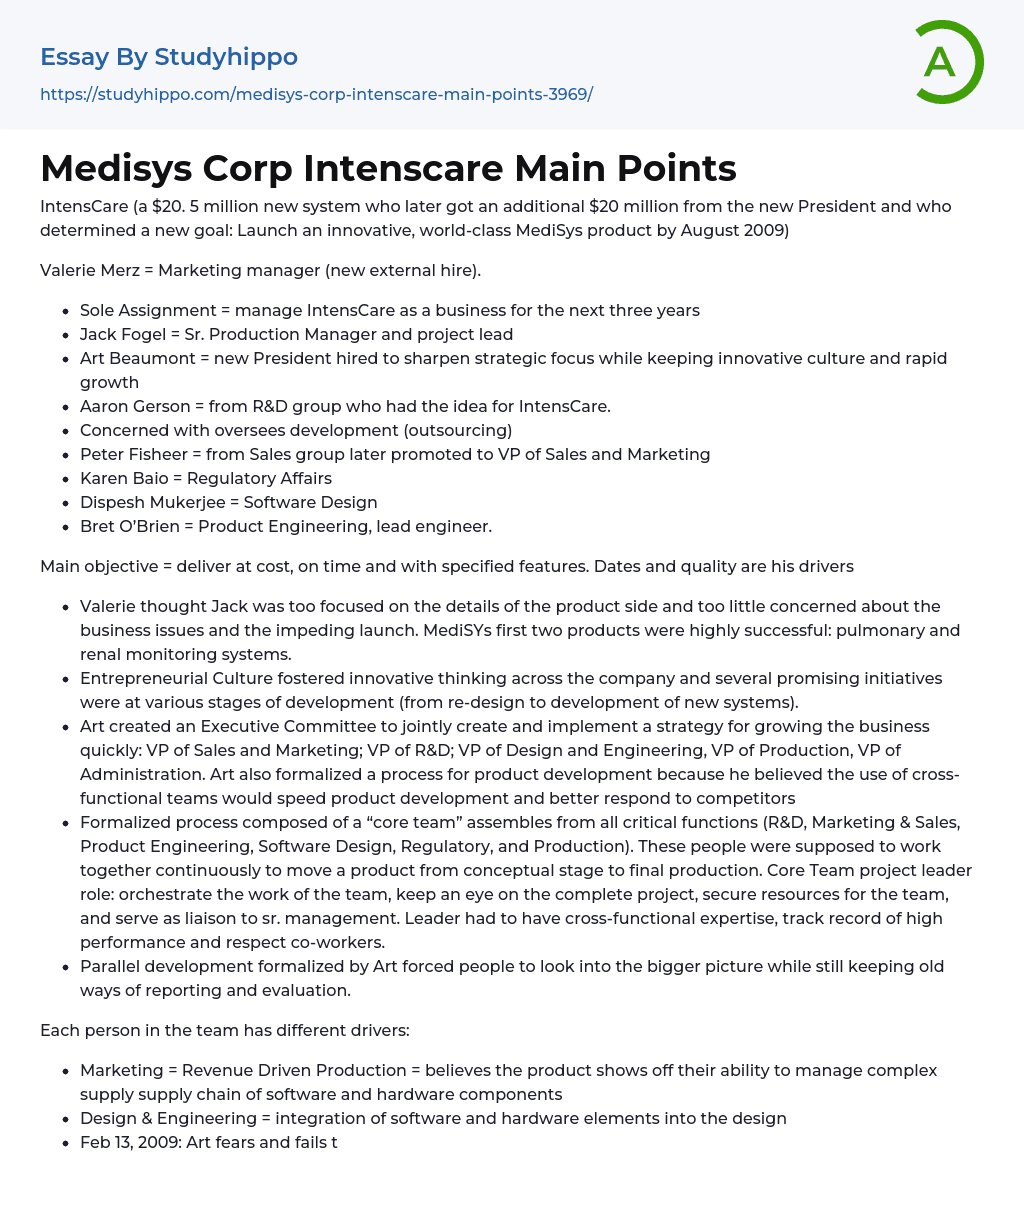 Medisys Corp Intenscare Main Points Essay Example